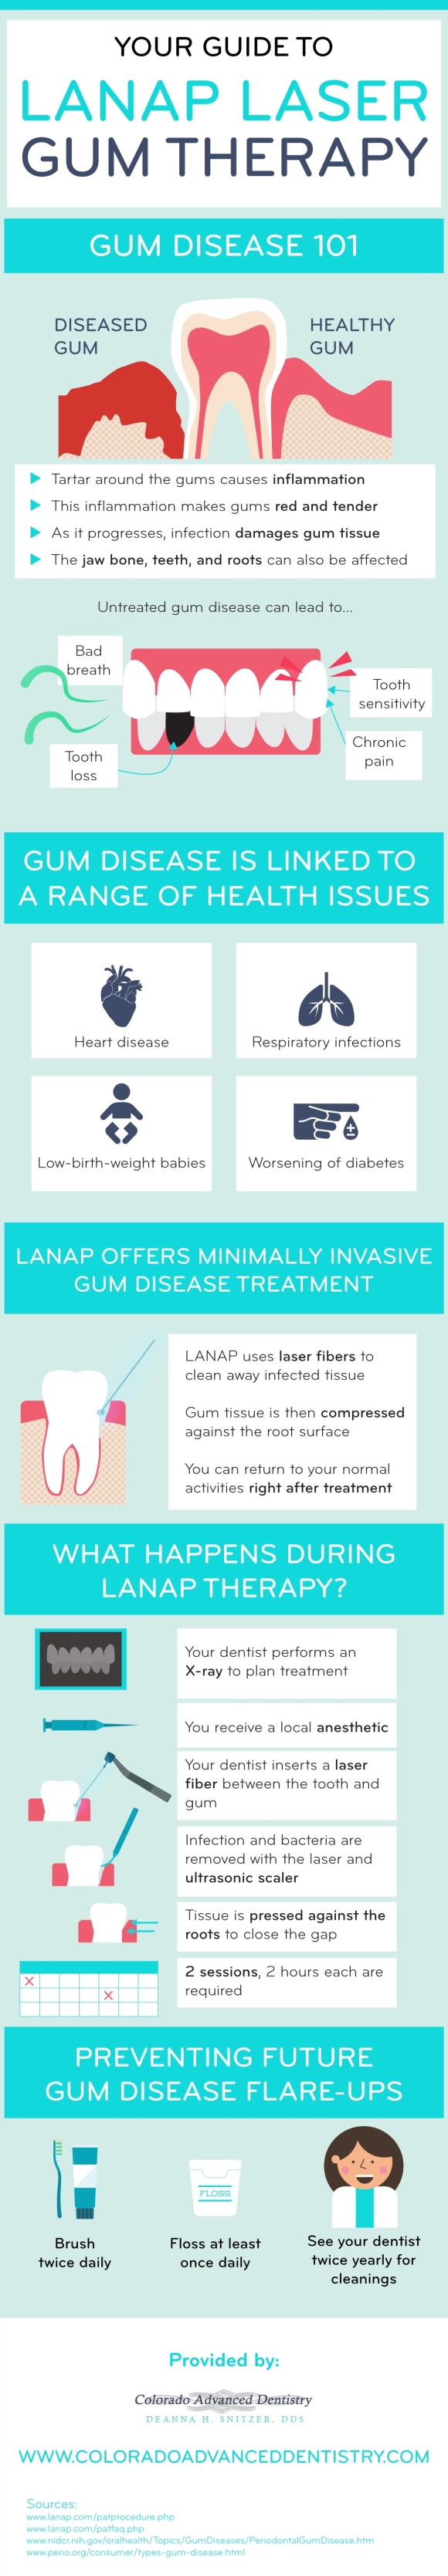 Your-Guide-To-LANAP-Laser-Gum-Therapy-Infographic